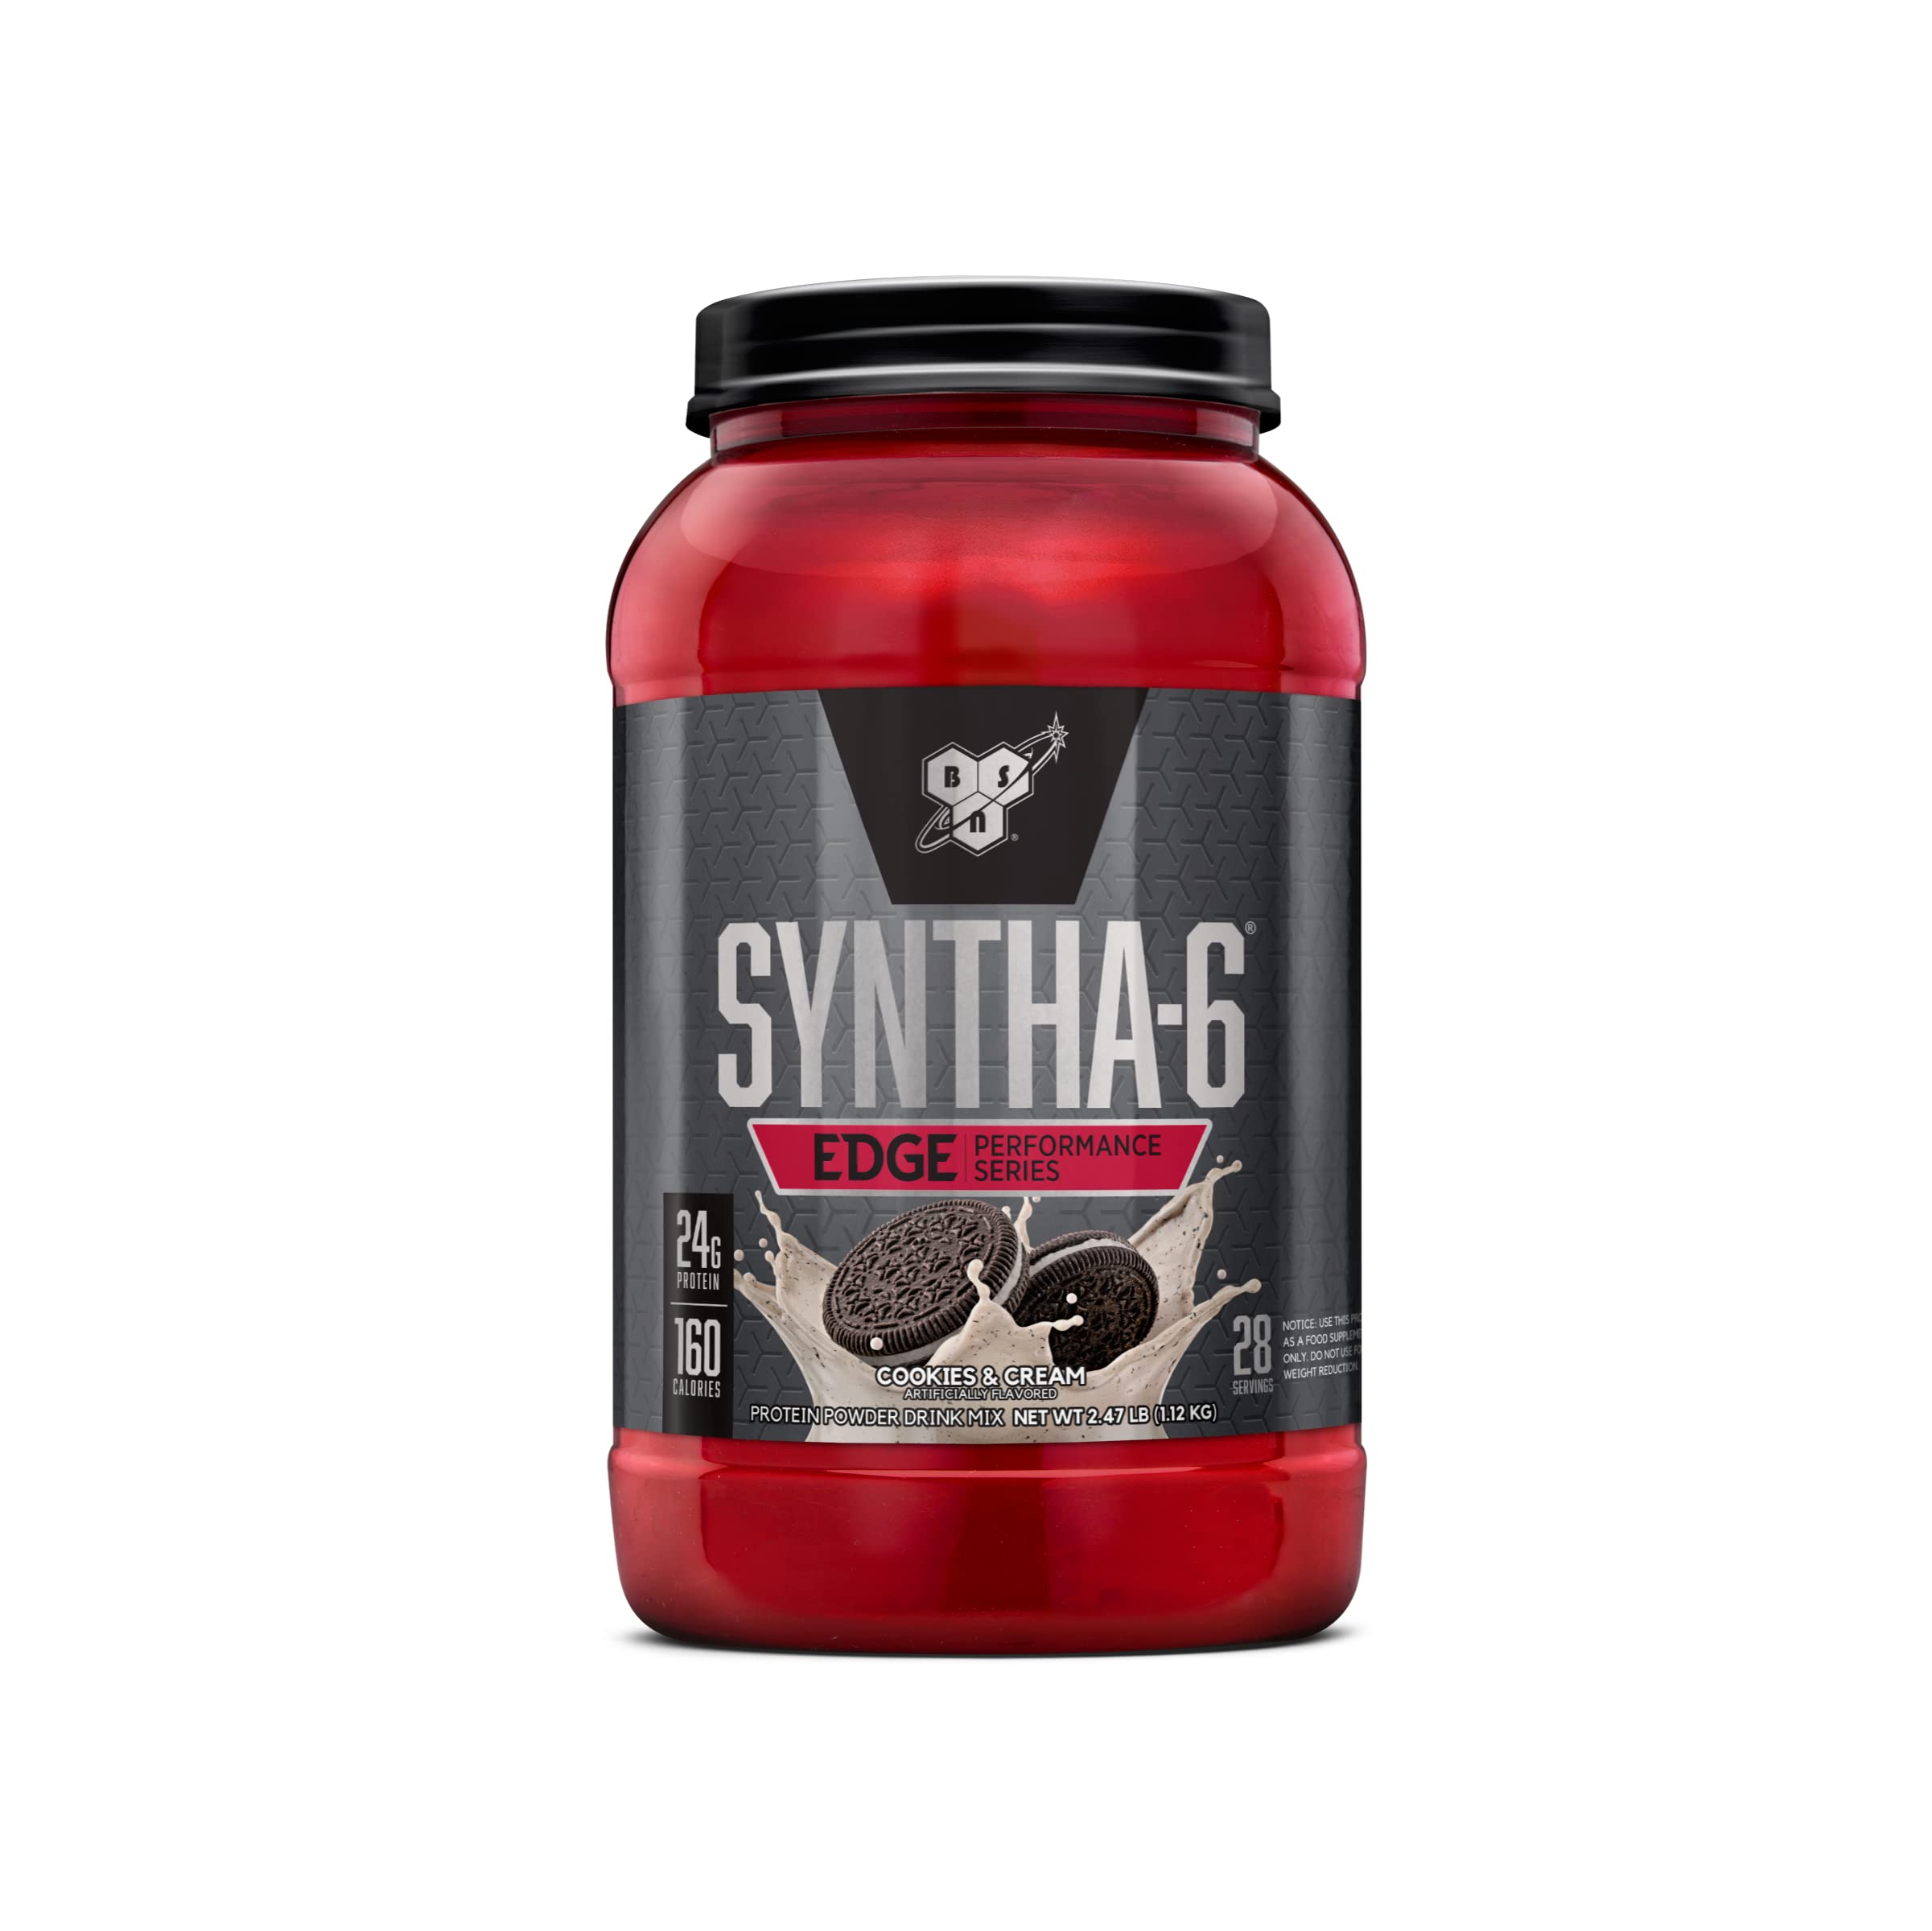 Book Cover BSN SYNTHA-6 Edge Protein Powder, with Hydrolyzed Whey, Micellar Casein, Milk Protein Isolate, Low Sugar, 24g Protein, Cookies N Cream, 28 Servings Cookies and Cream 2.47 Pound (Pack of 1)